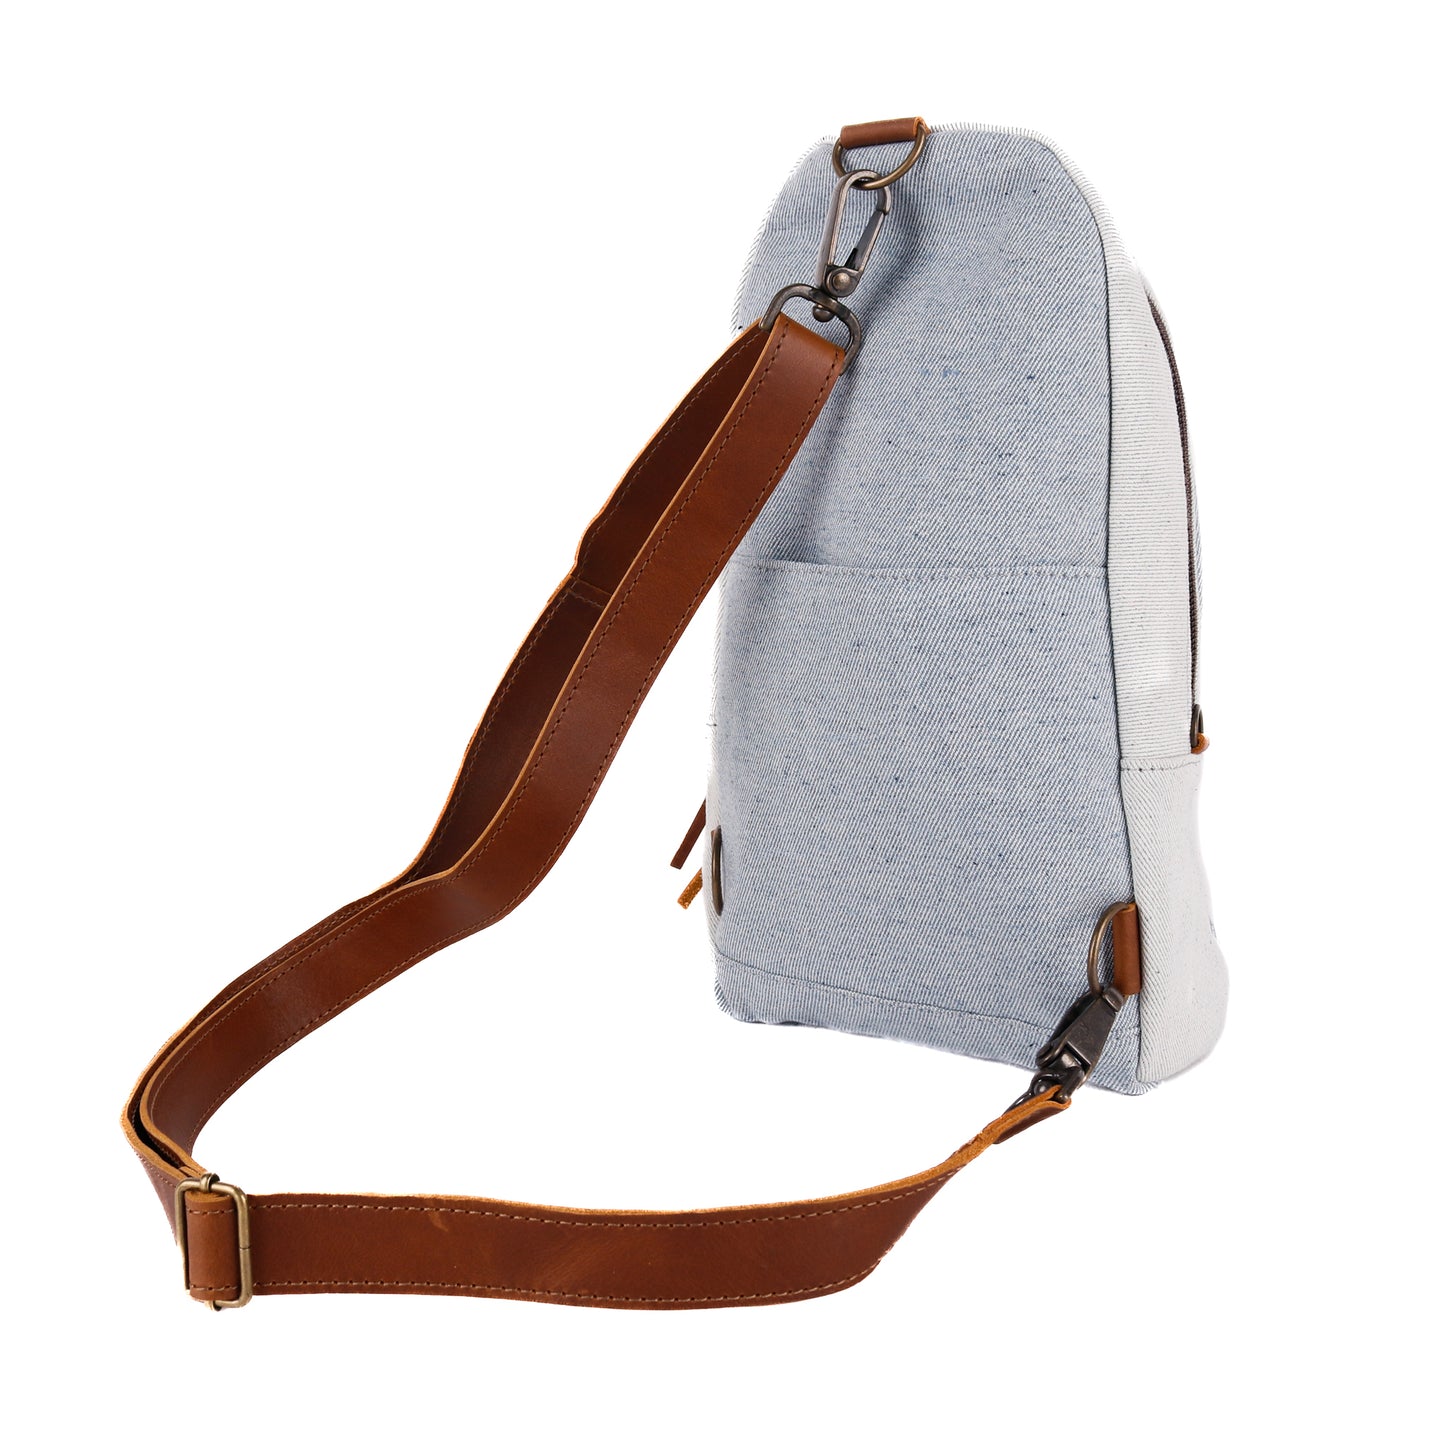 CROSSBODY SLING 2.0 - UPCYCLED DENIM WITH PATCH - CAFE - NO. 11336